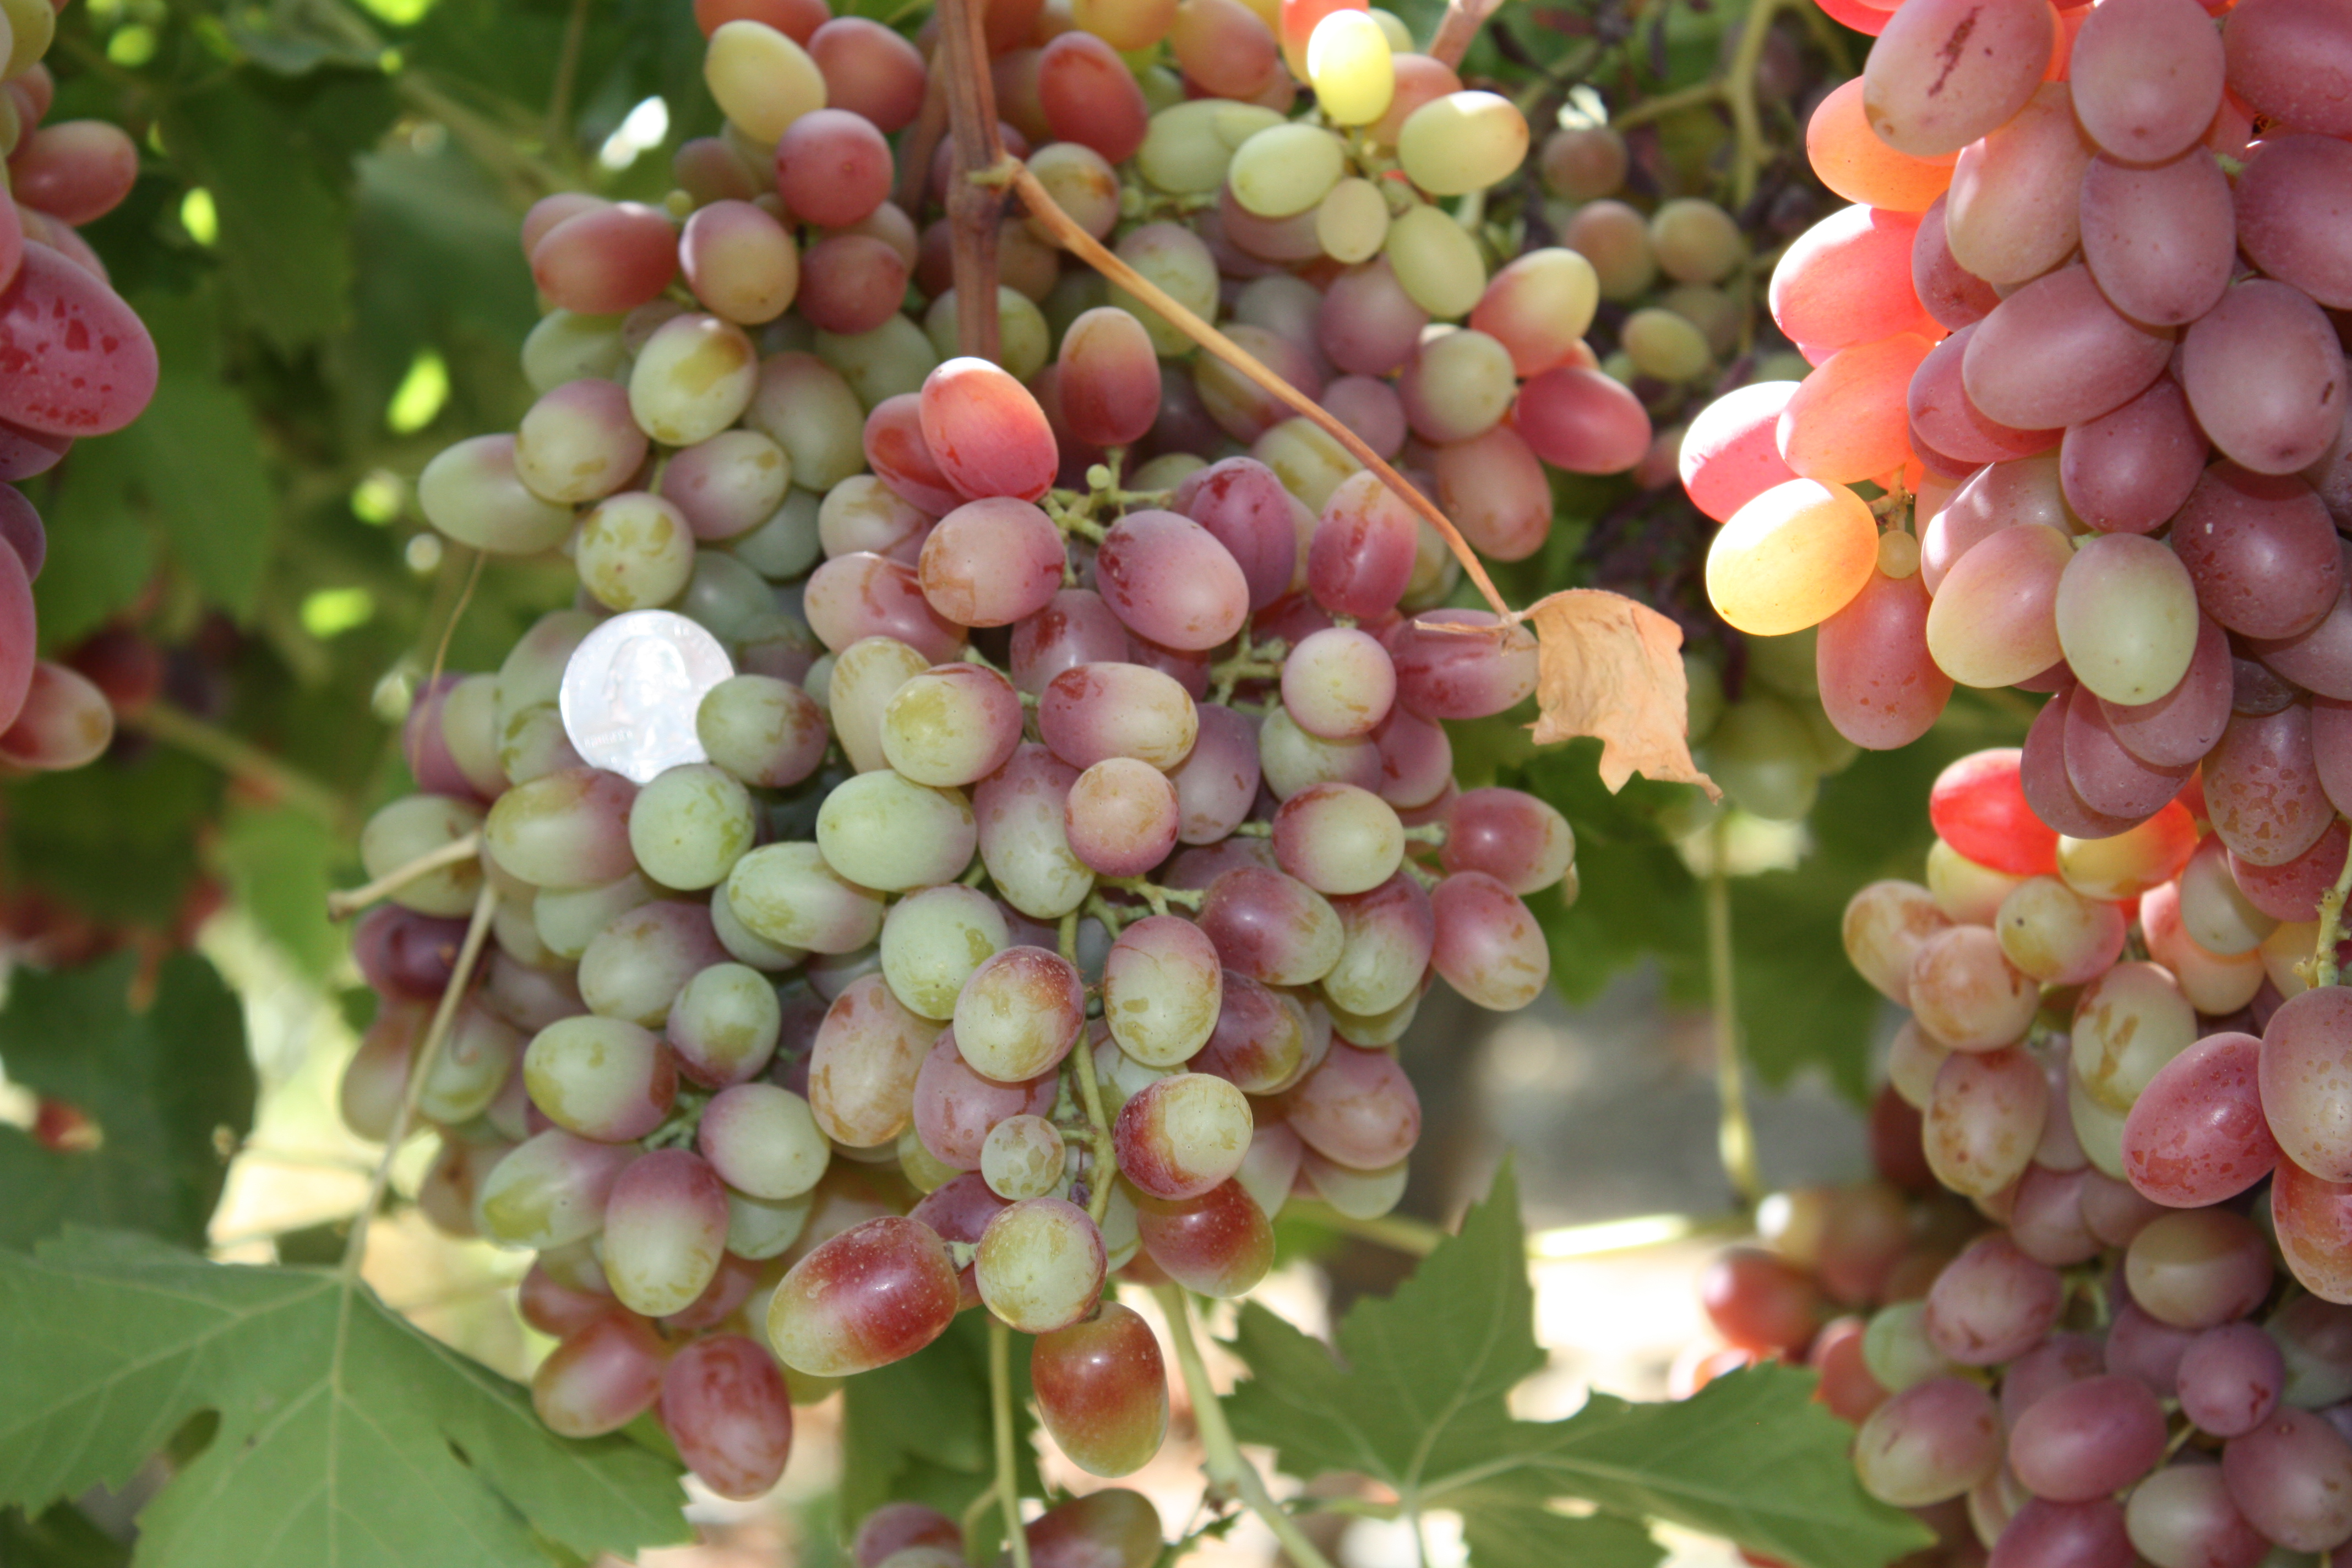 Drought-stressed grapes have variable coloring, rather than a uniform deep red. And they're smaller than the shiny quarter -- a common test of grape quality.